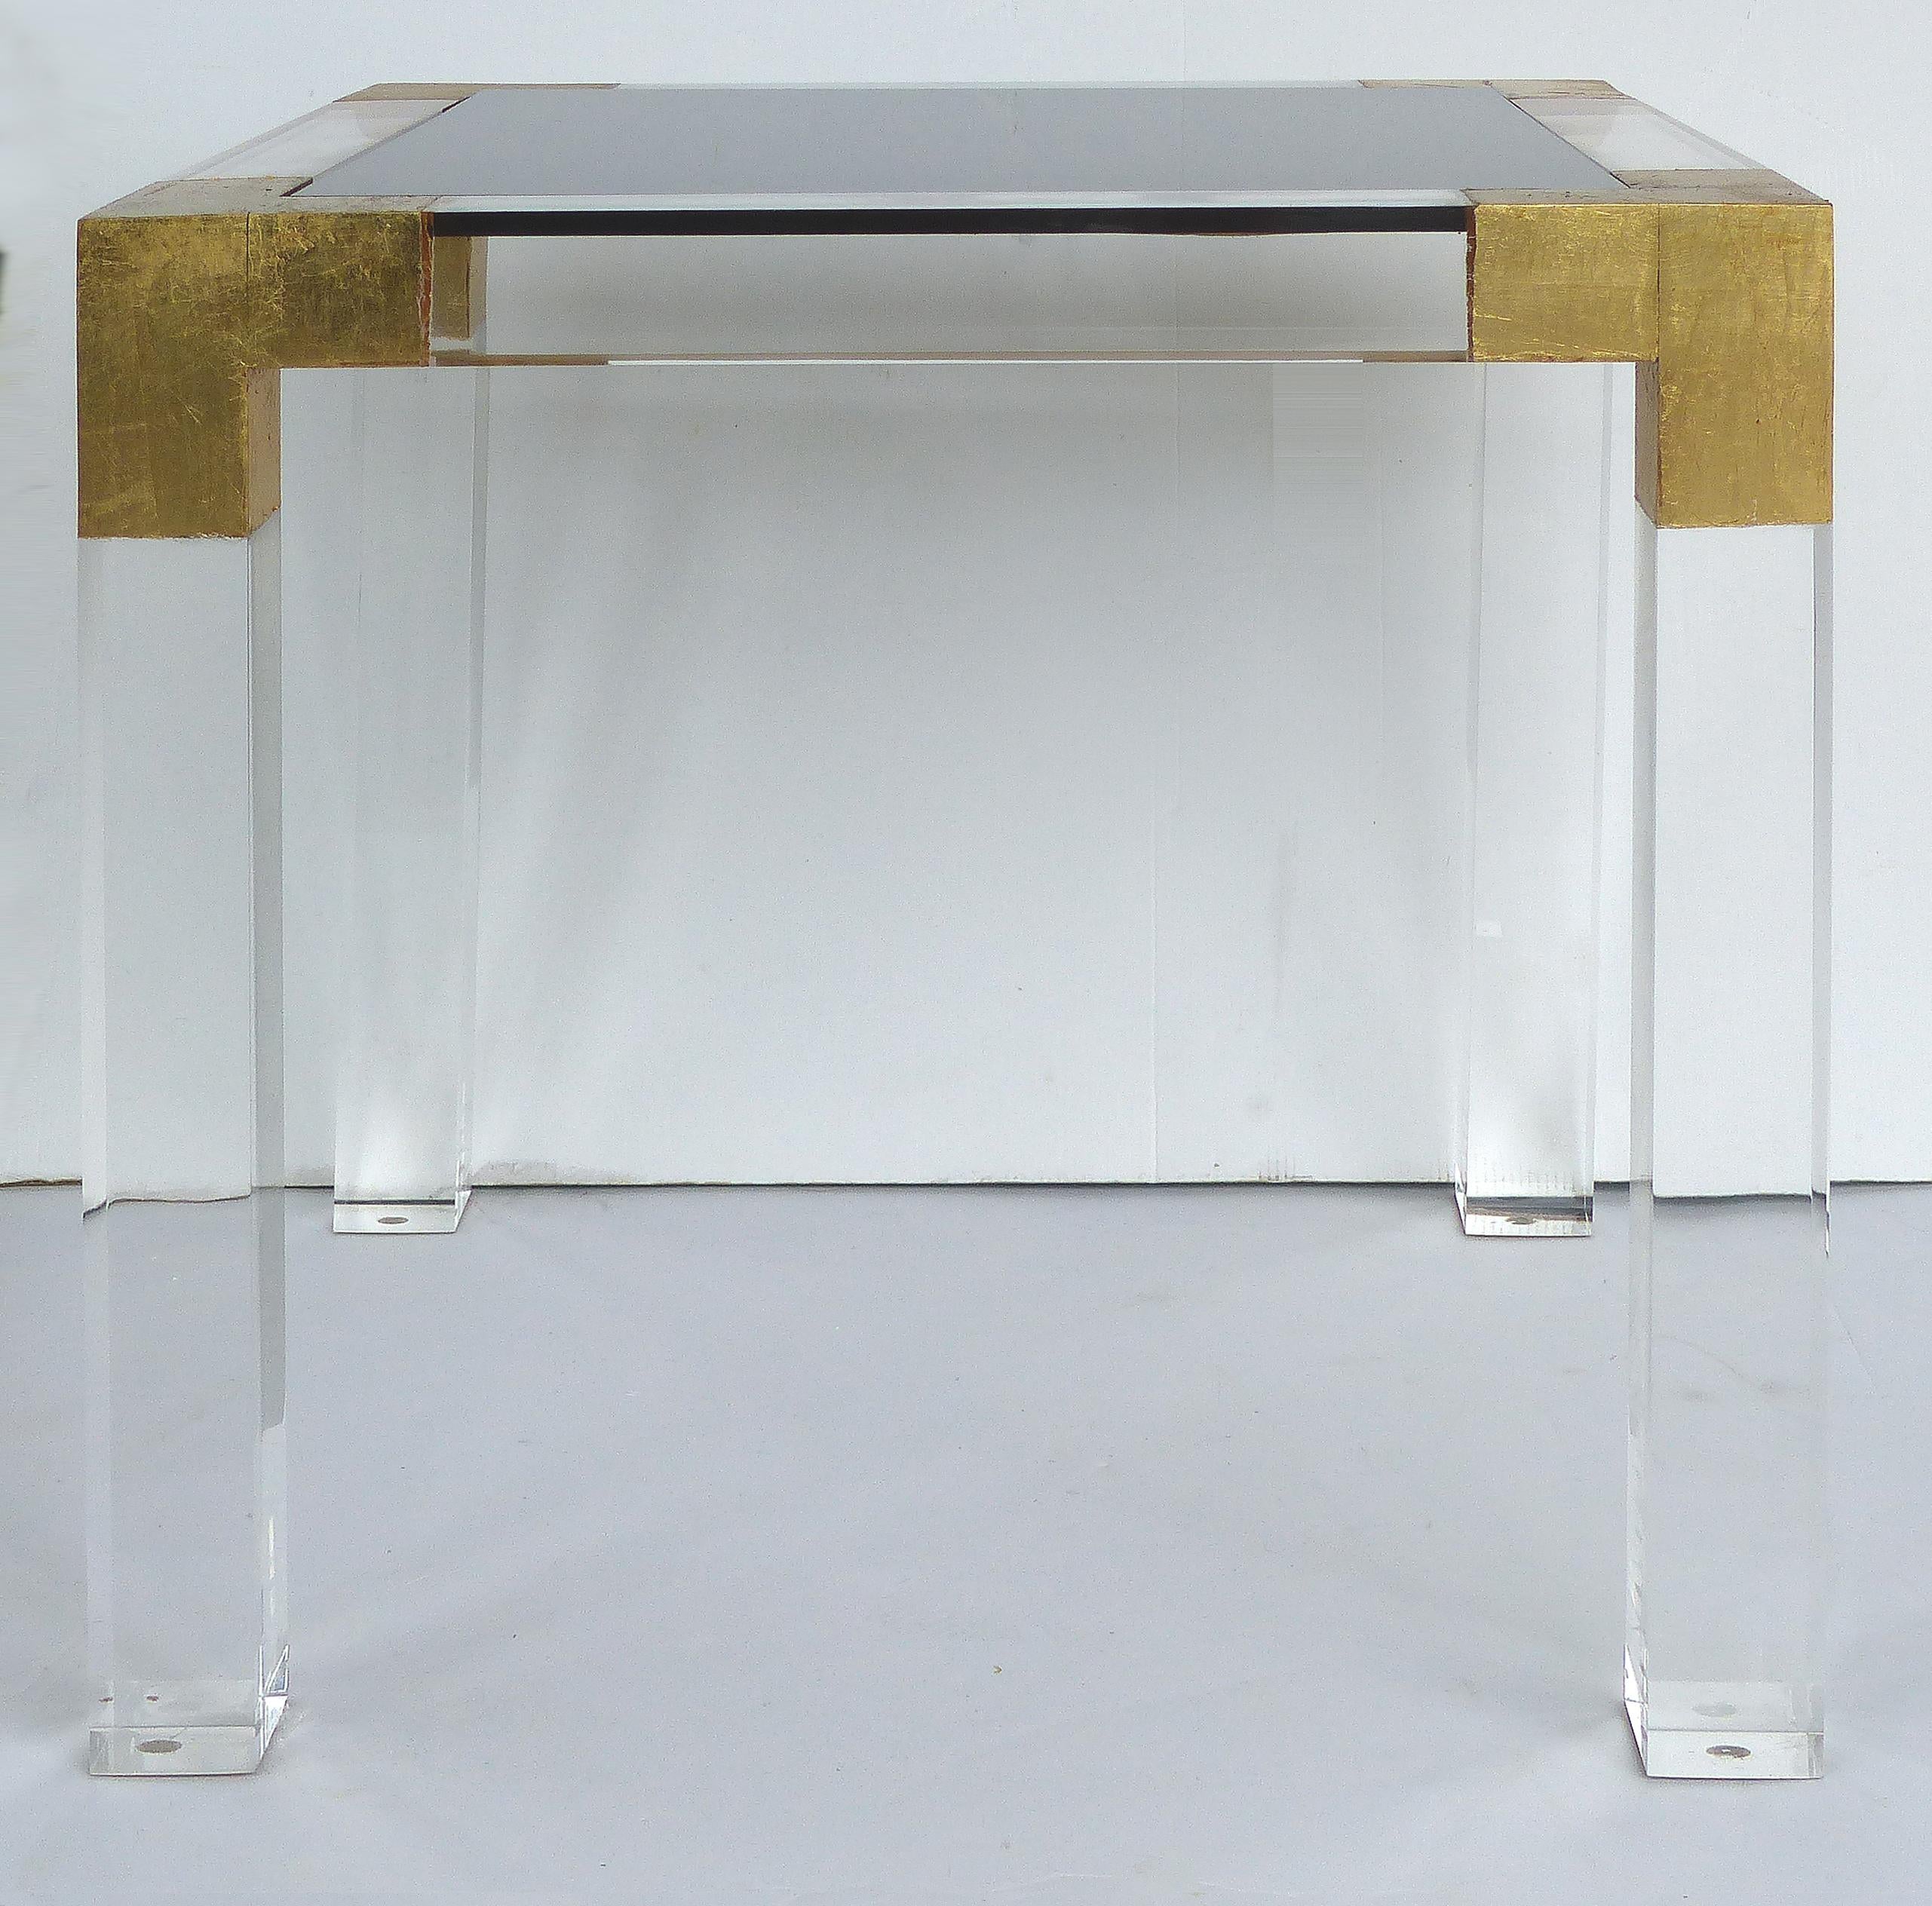 Custom Lucite Side Table with Interchangeable Tops and Gold Leaf Accents

Offered for sale is a custom-made side table made of thick Lucite having gold leaf accents on the corners and interchangeable tops; one in black Lucite, the second in clear